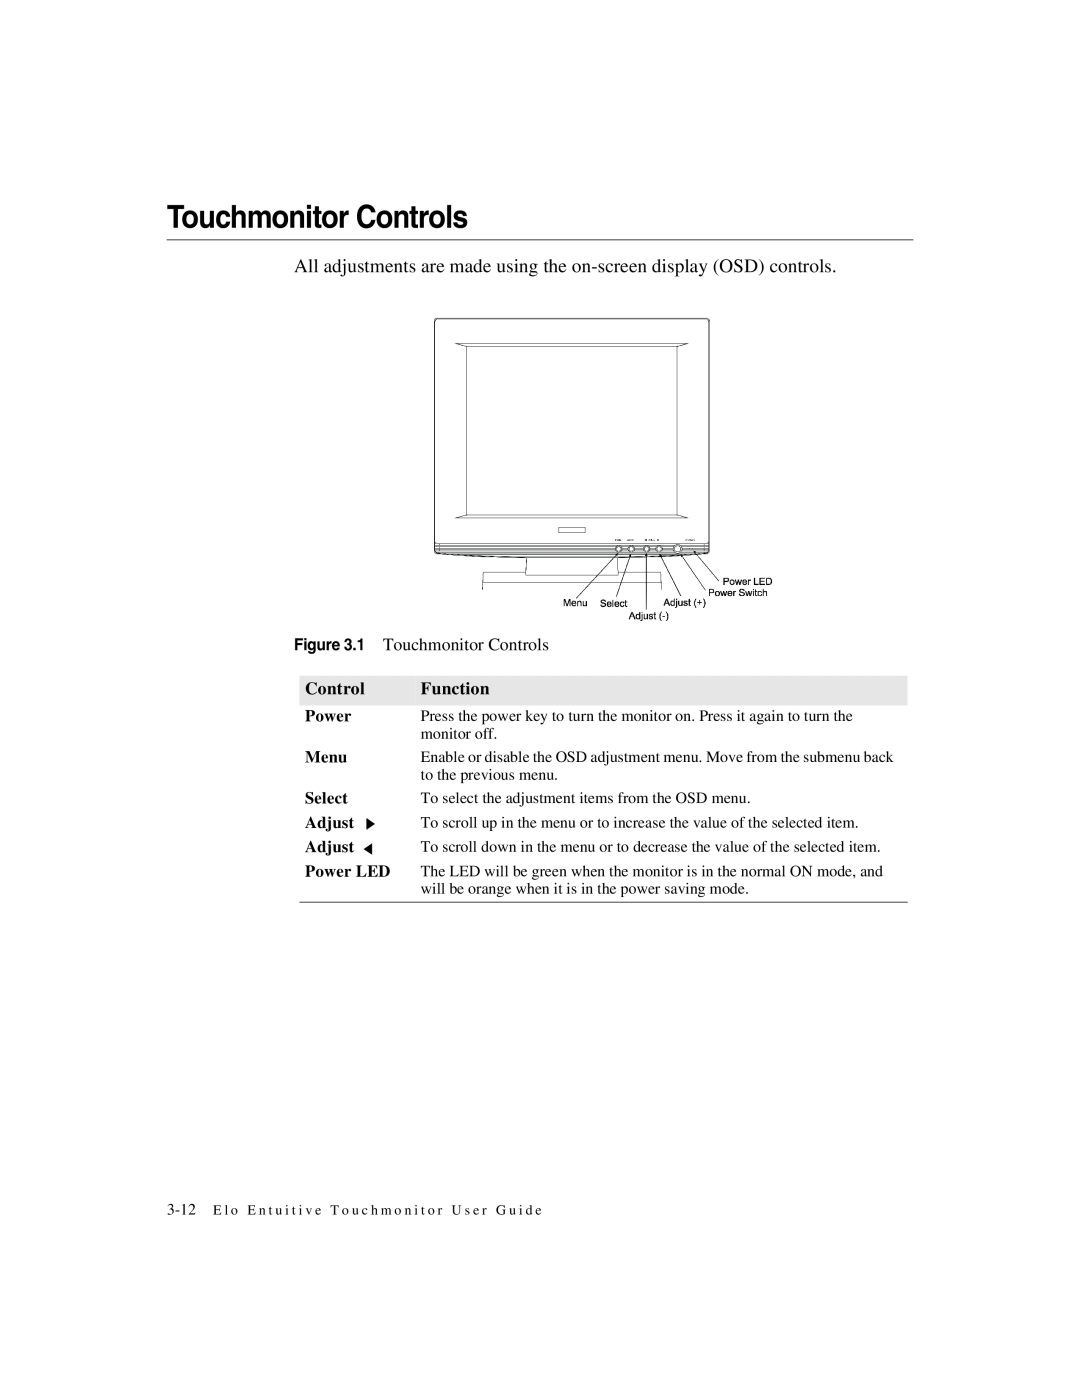 Elo TouchSystems 1725L Series Touchmonitor Controls, All adjustments are made using the on-screen display OSD controls 